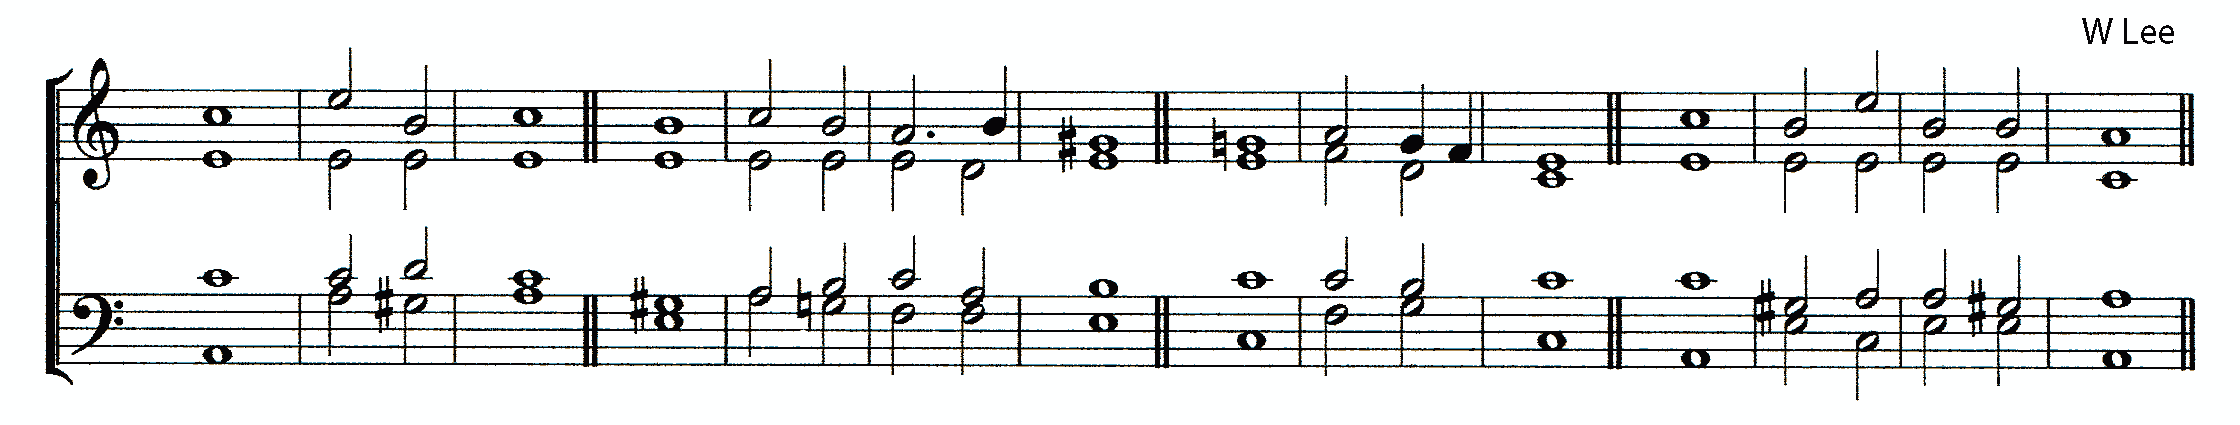 Double chant in A minor by William Lee